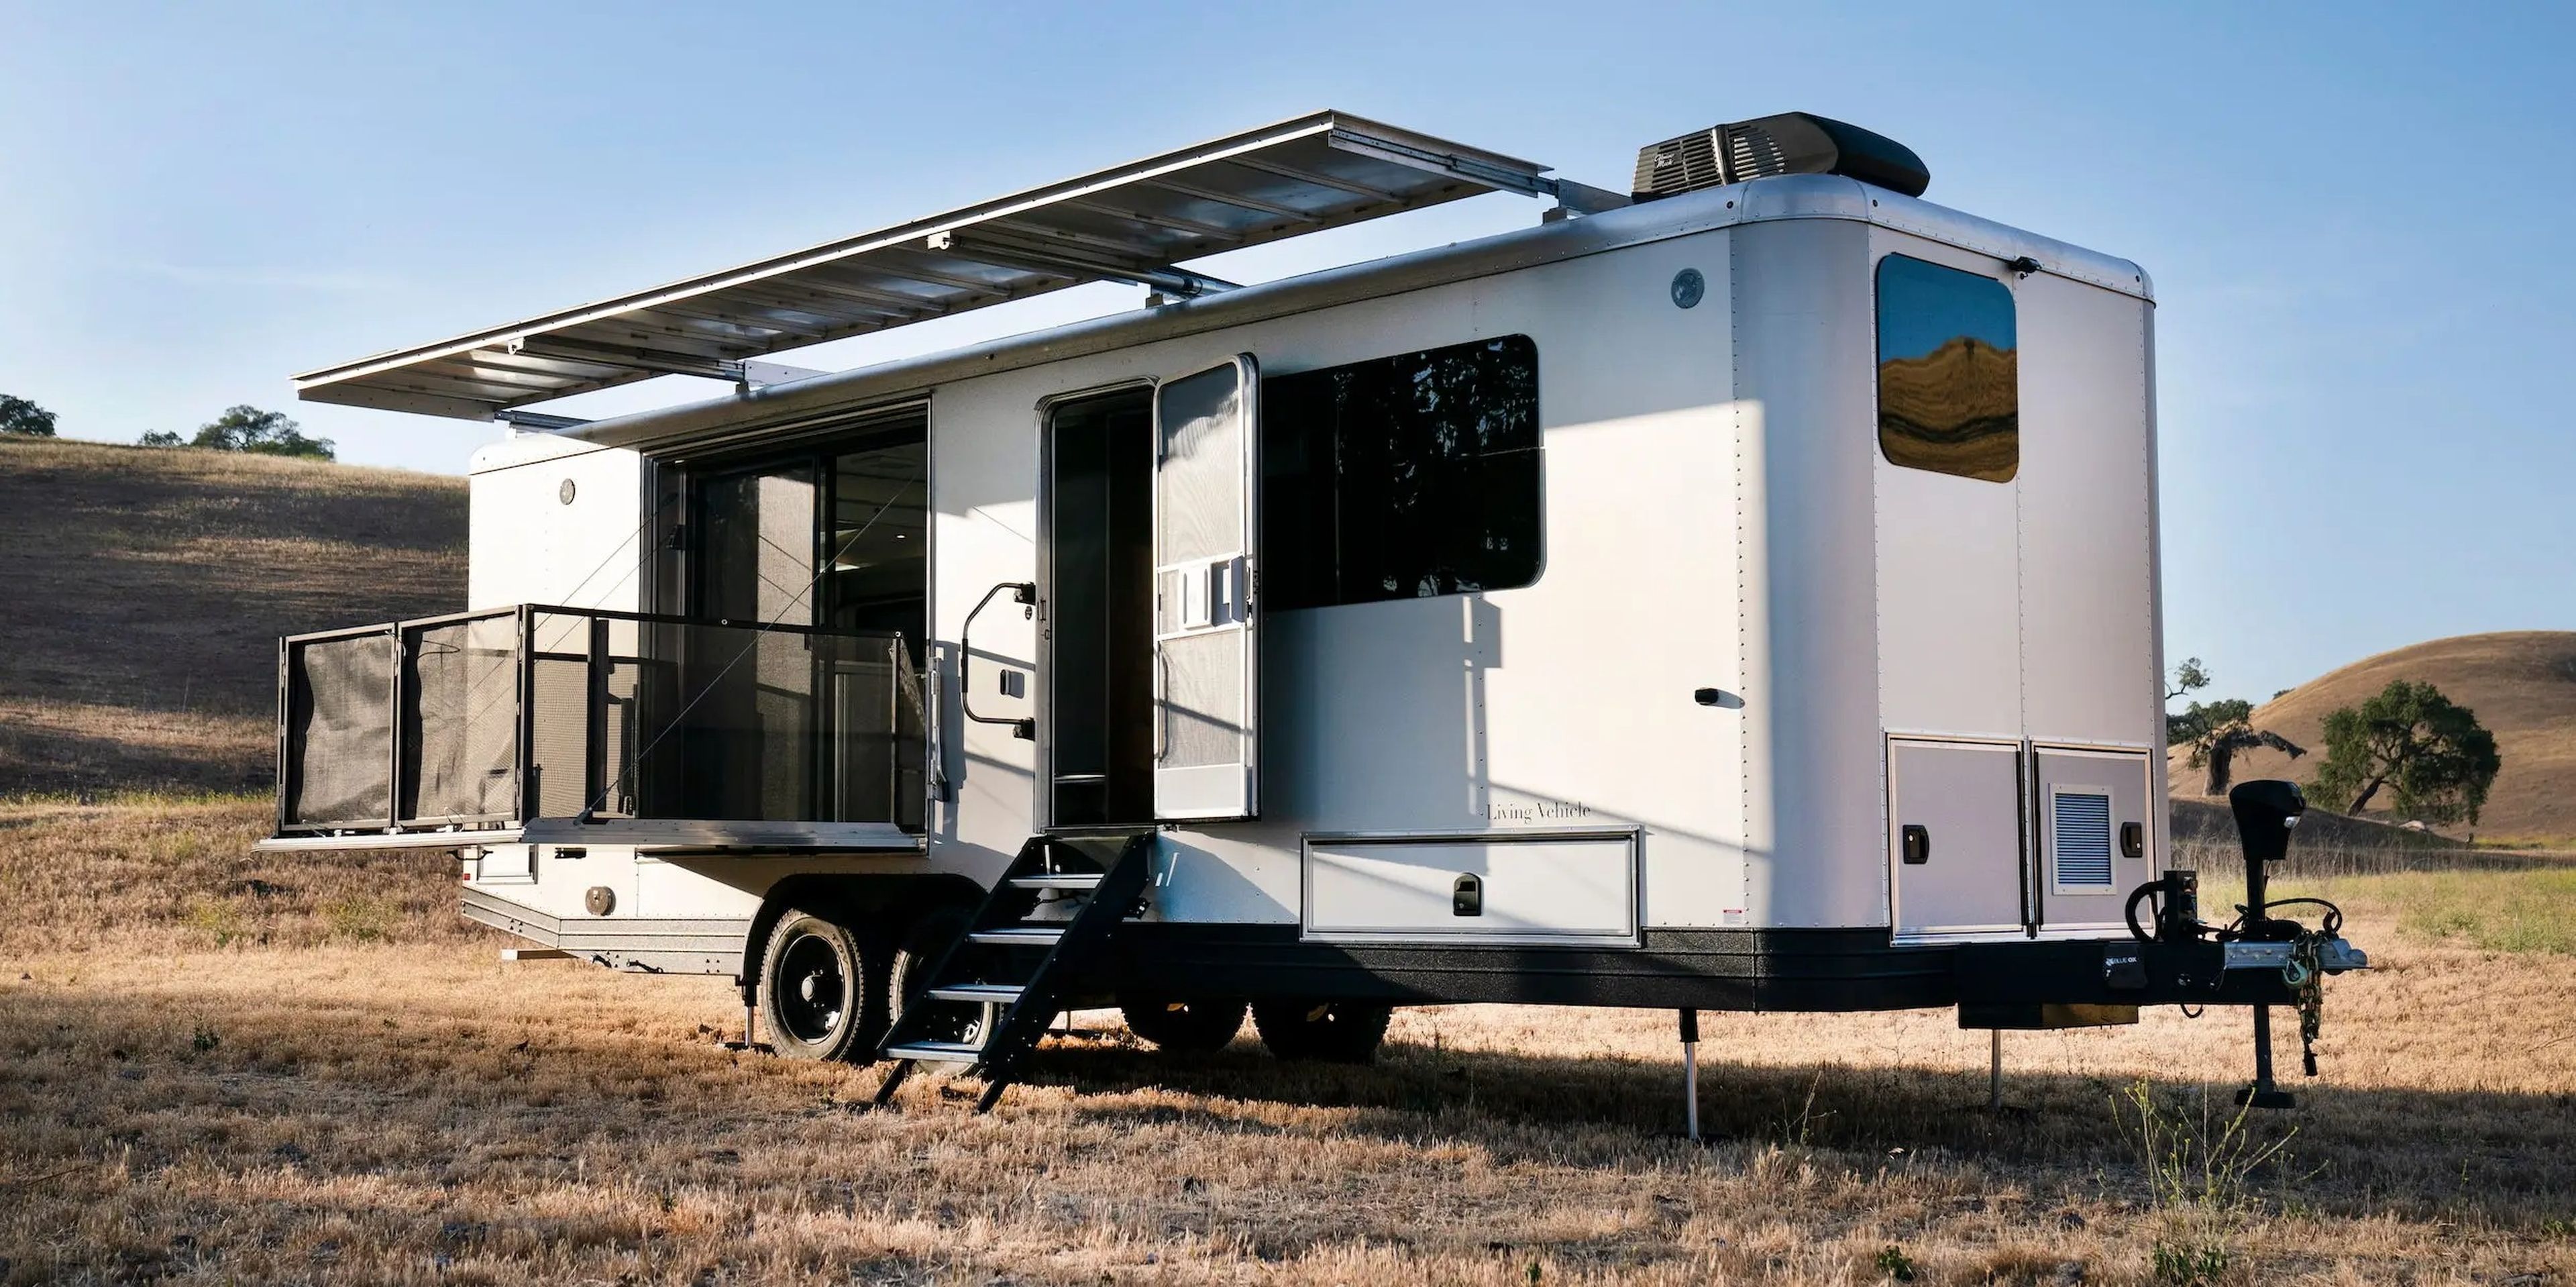 The exterior of the travel trailer as it sits on a brown field. The patio is extended.